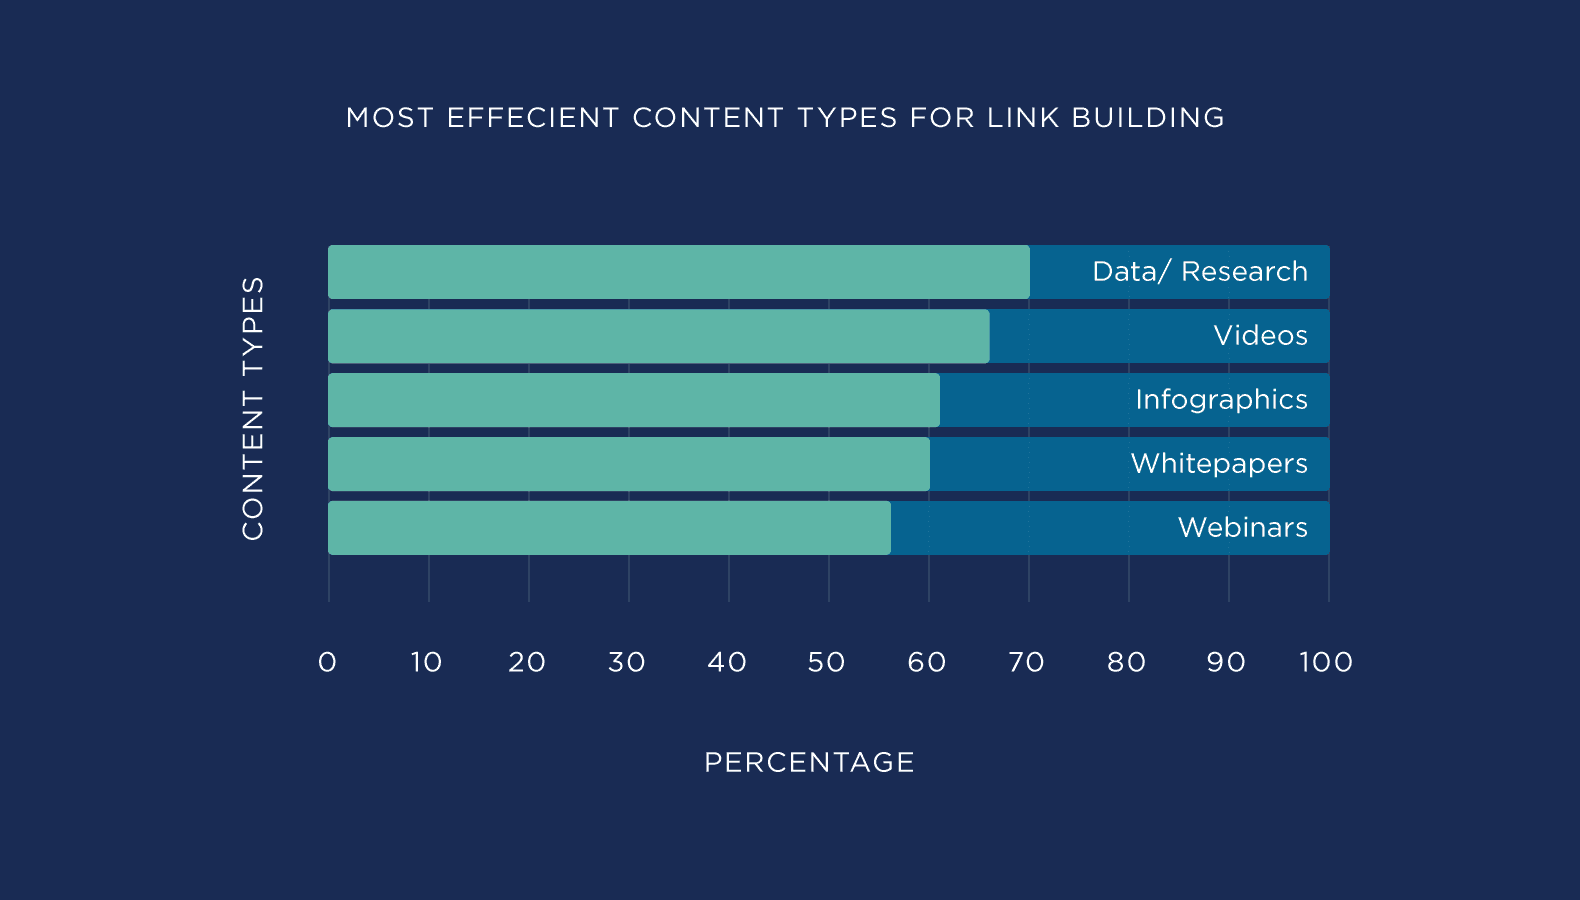 Survey results are most efficient content types for link building